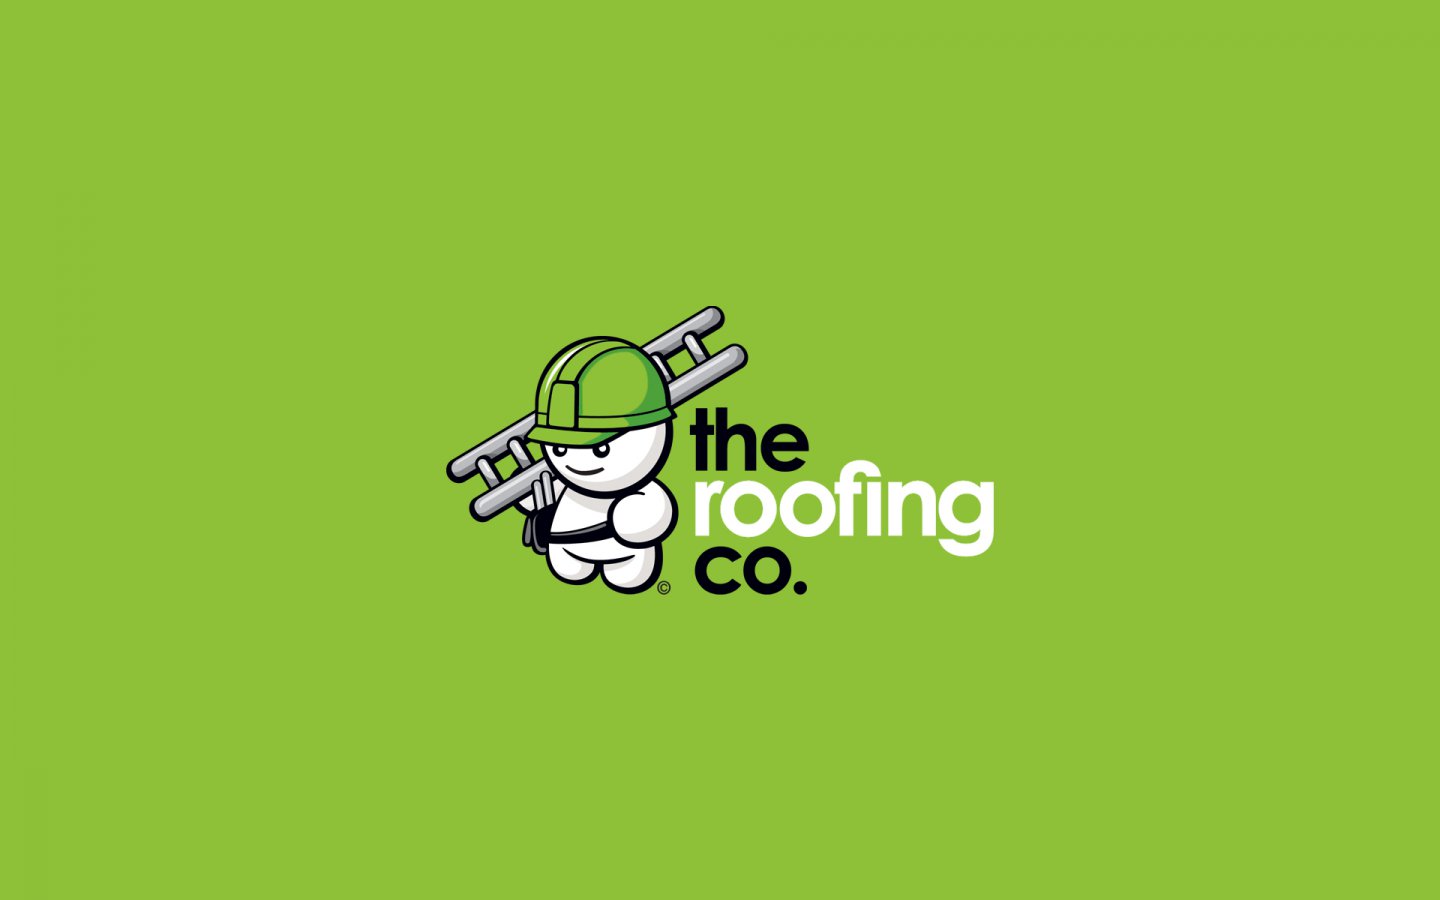 The Roofing Company, Logo Design in Brand Colours